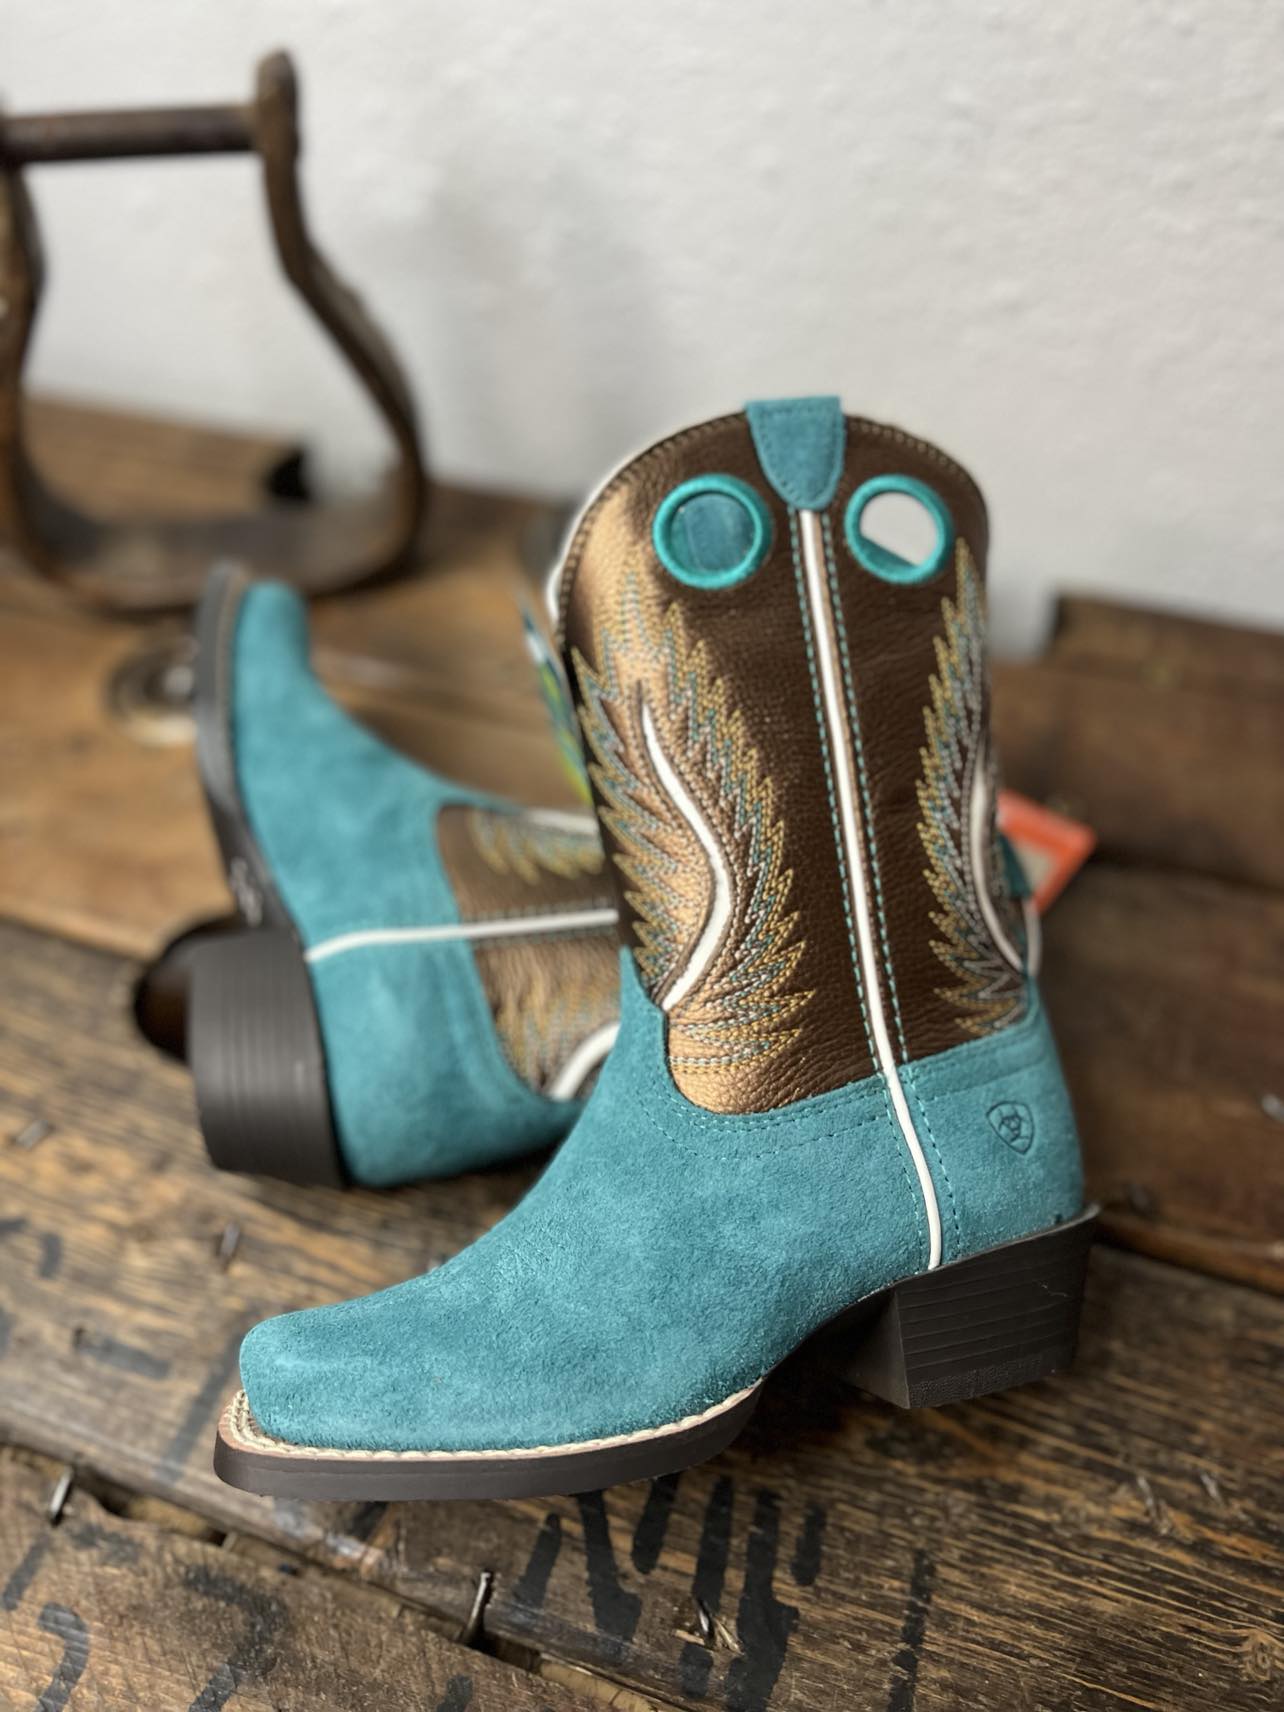 Kids Ariat Futurity Fort Worth Boot in Teal Suede-Kids Boots-Ariat-Lucky J Boots & More, Women's, Men's, & Kids Western Store Located in Carthage, MO